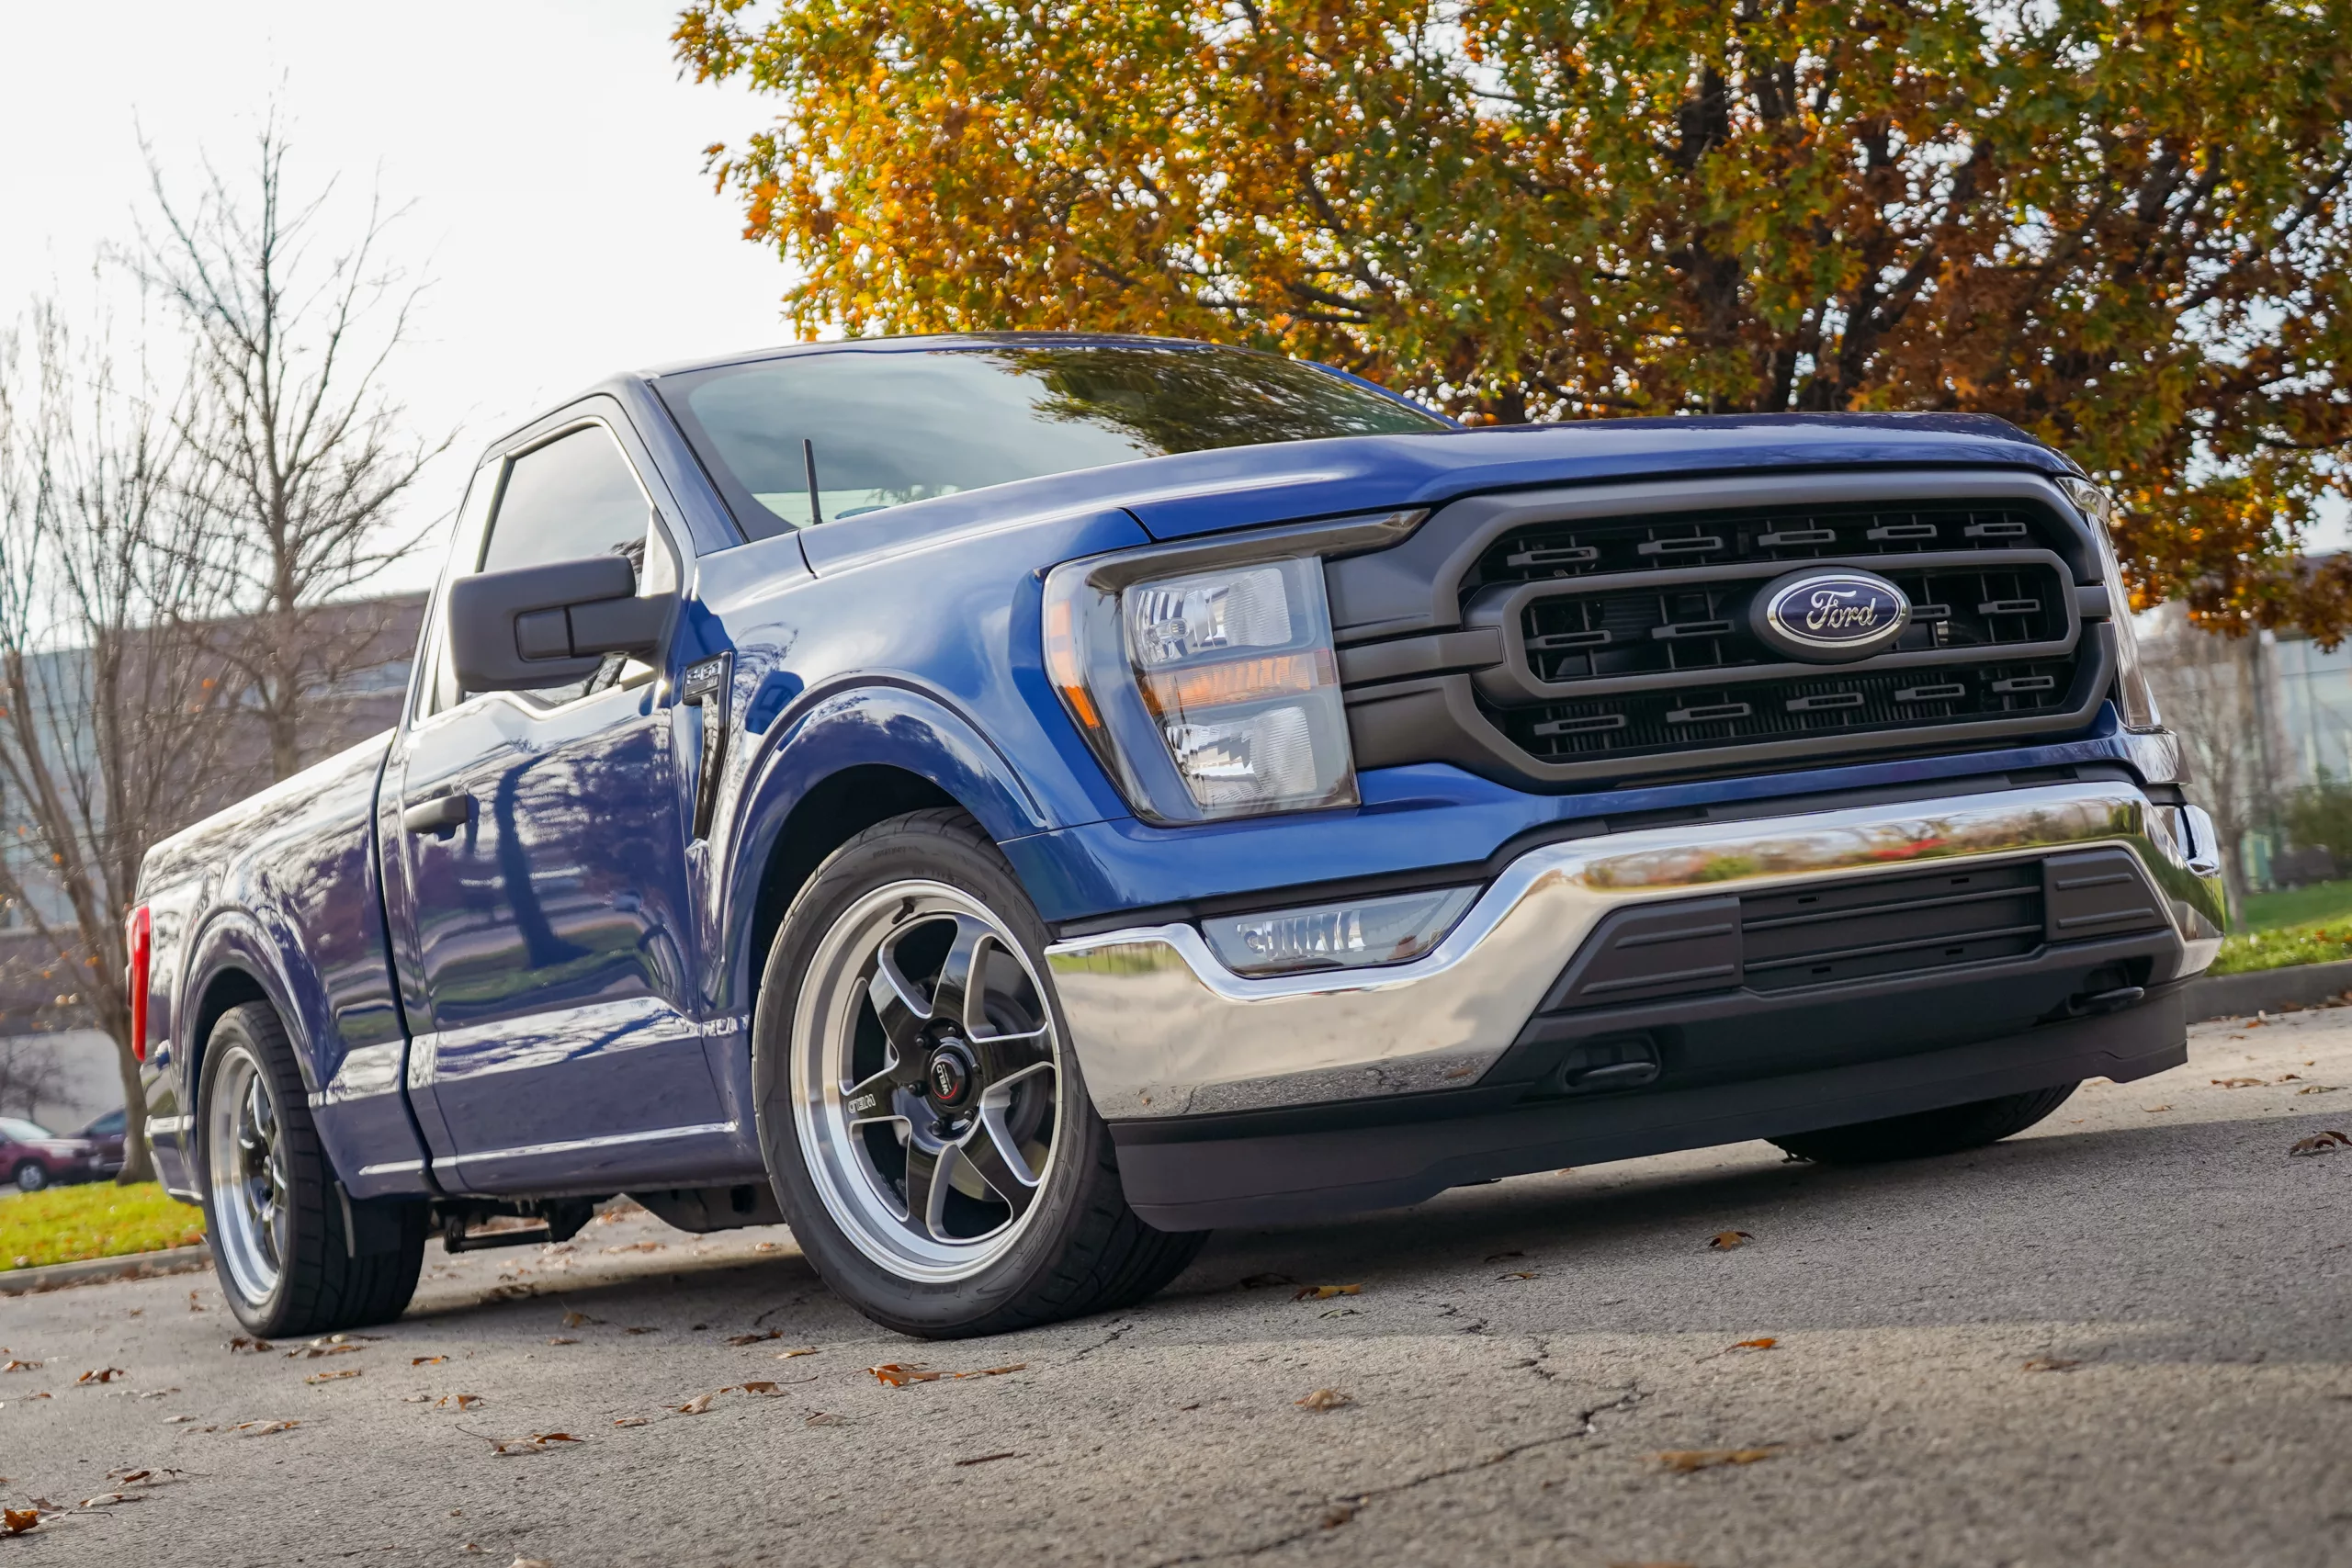 PROCHARGER SUPERCHARGERS' F-150 KITS PACK A PUNCH!